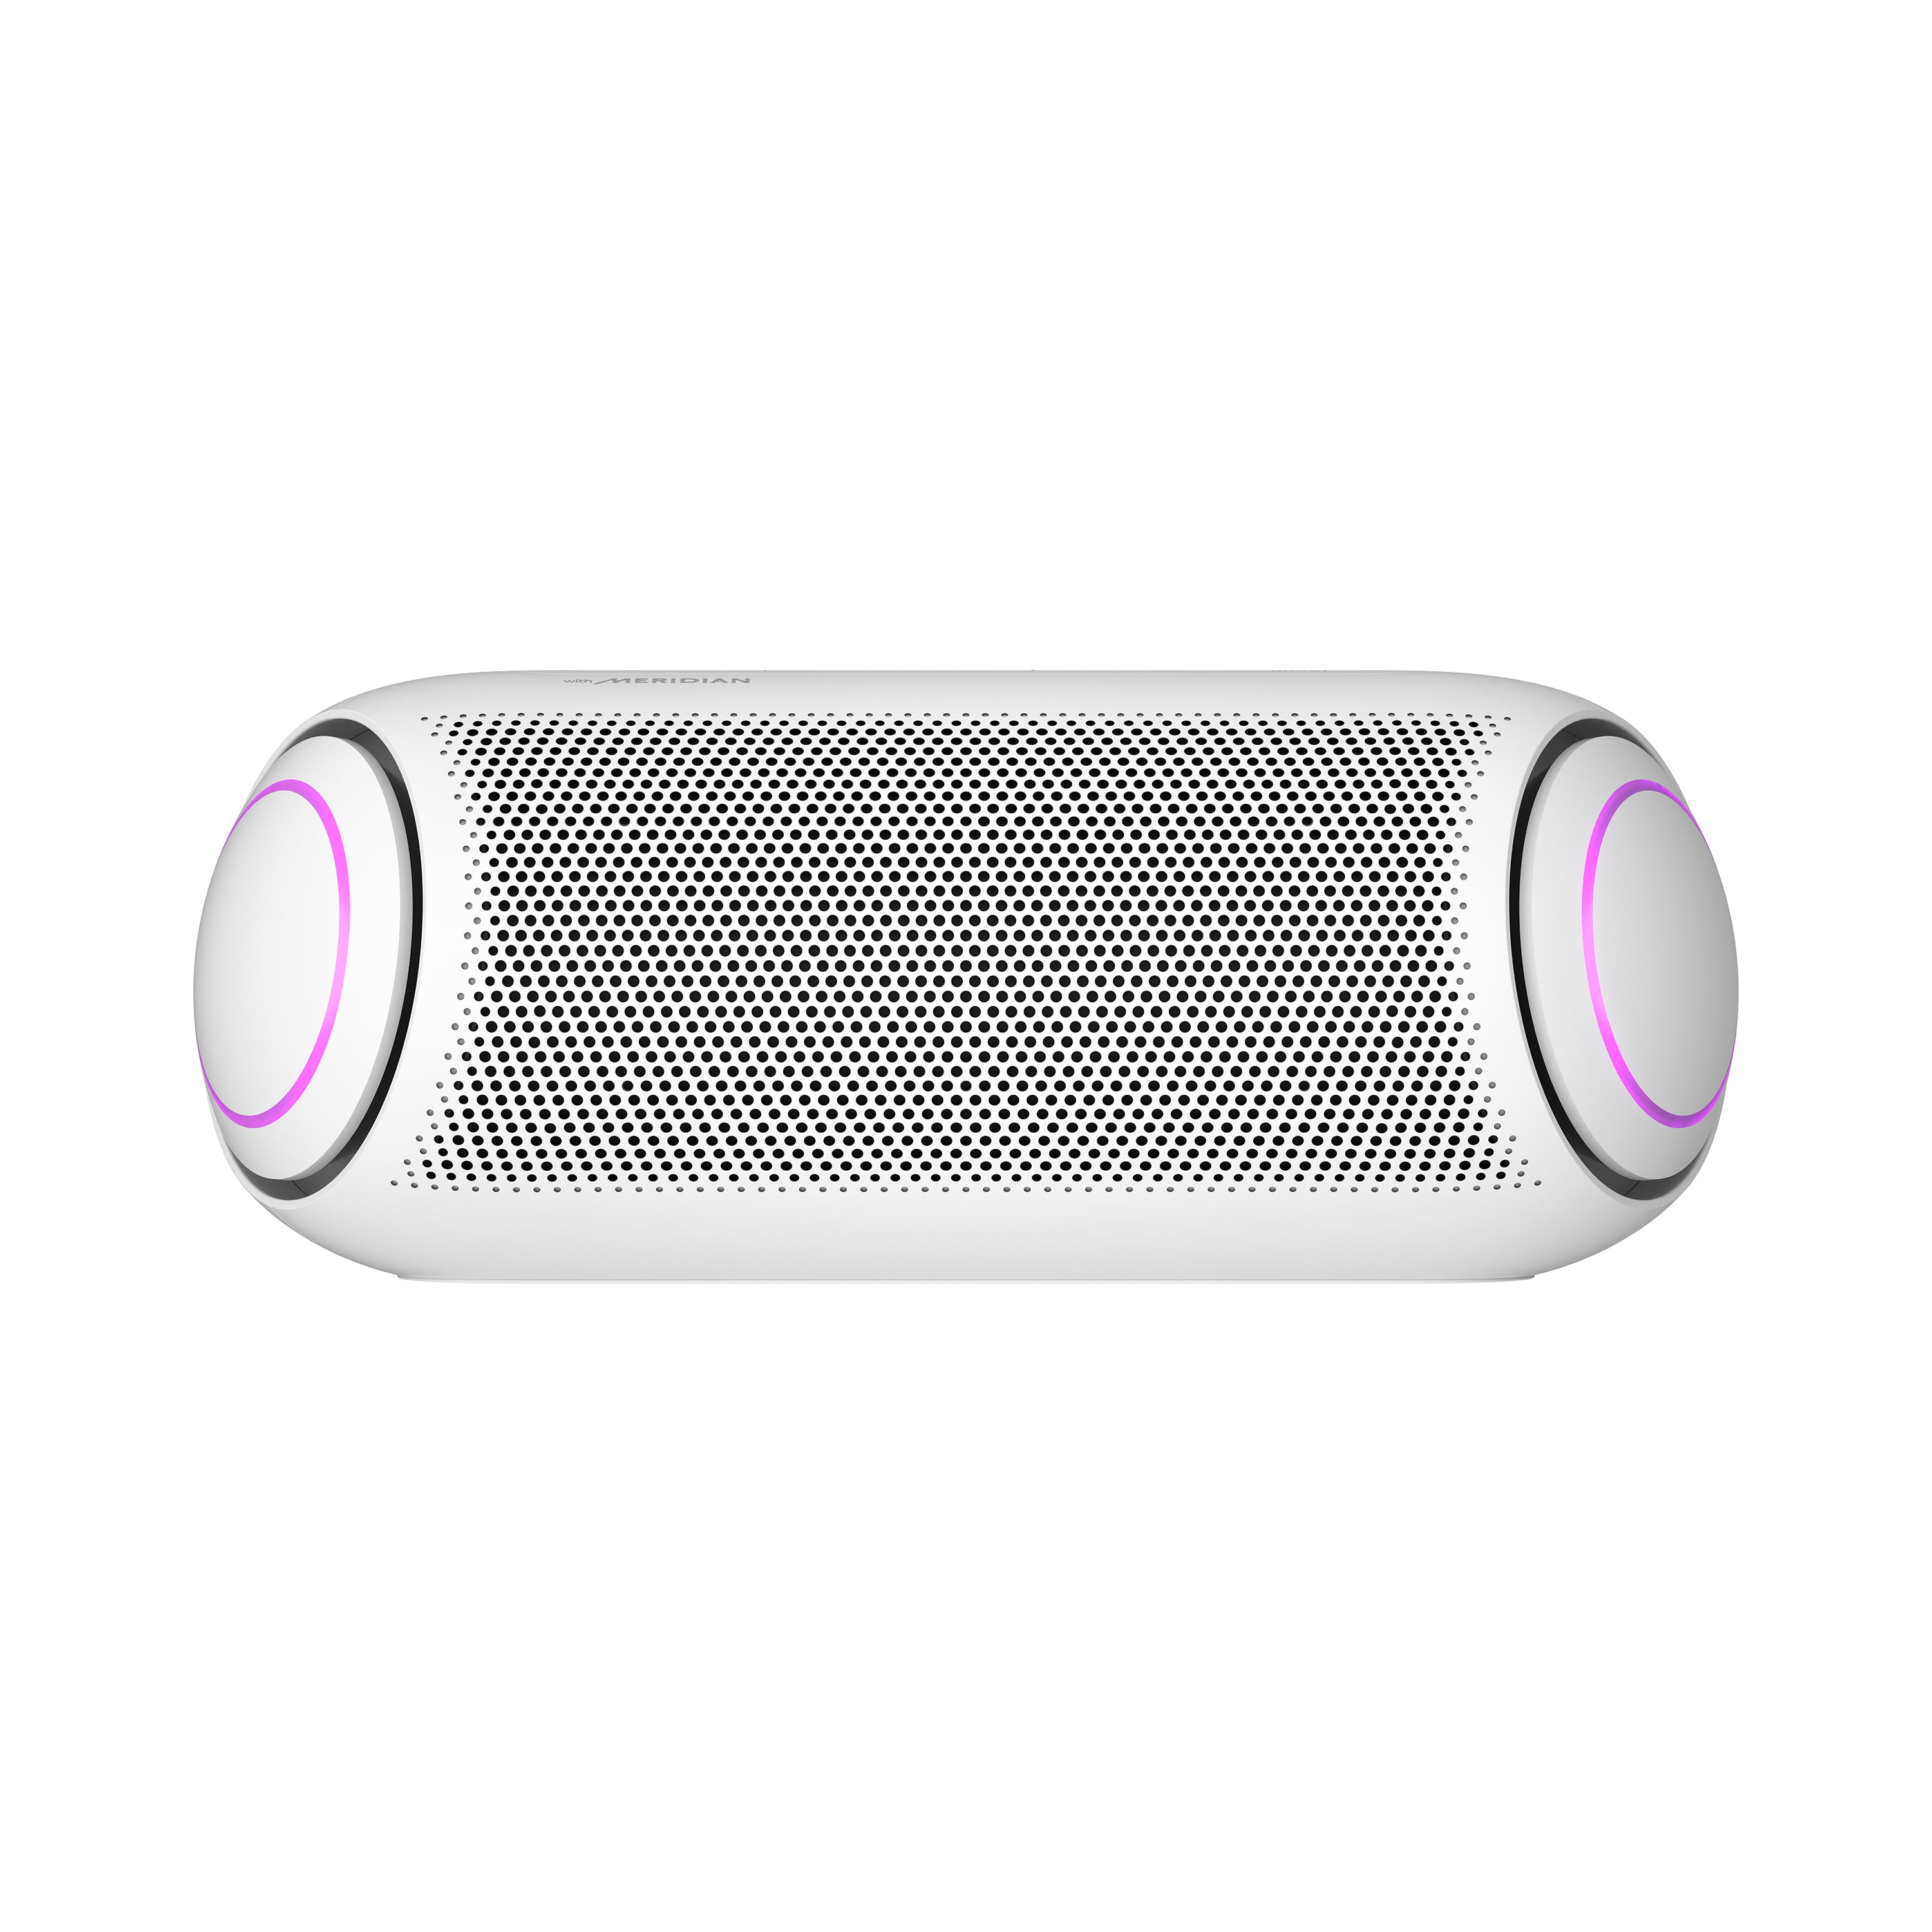 🎼 LG XBOOM XG7 speaker, will it be worth it without Meridian? 